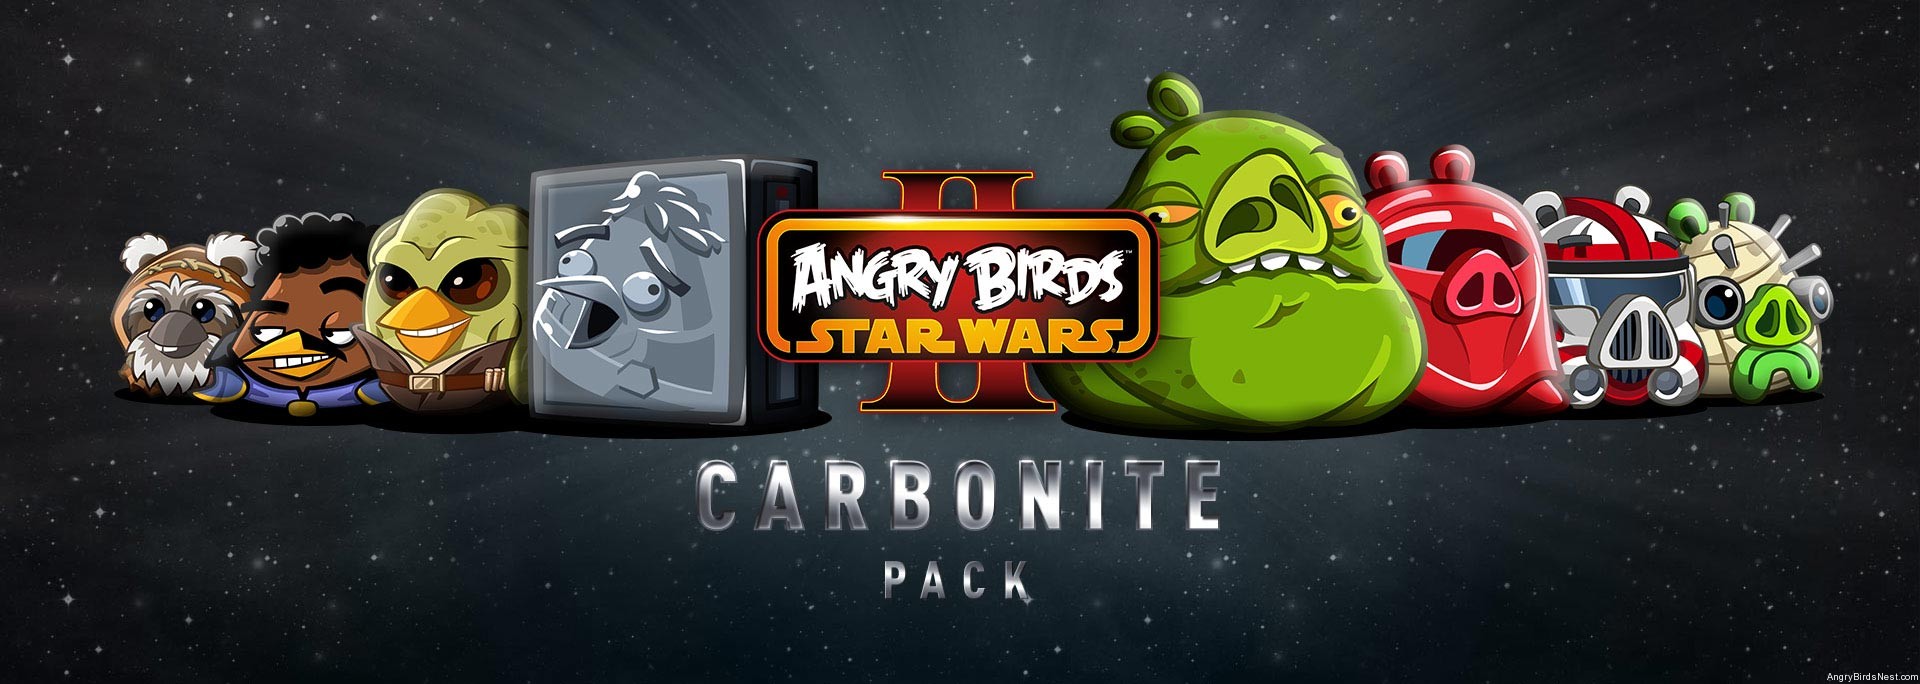 angry birds star wars han solo